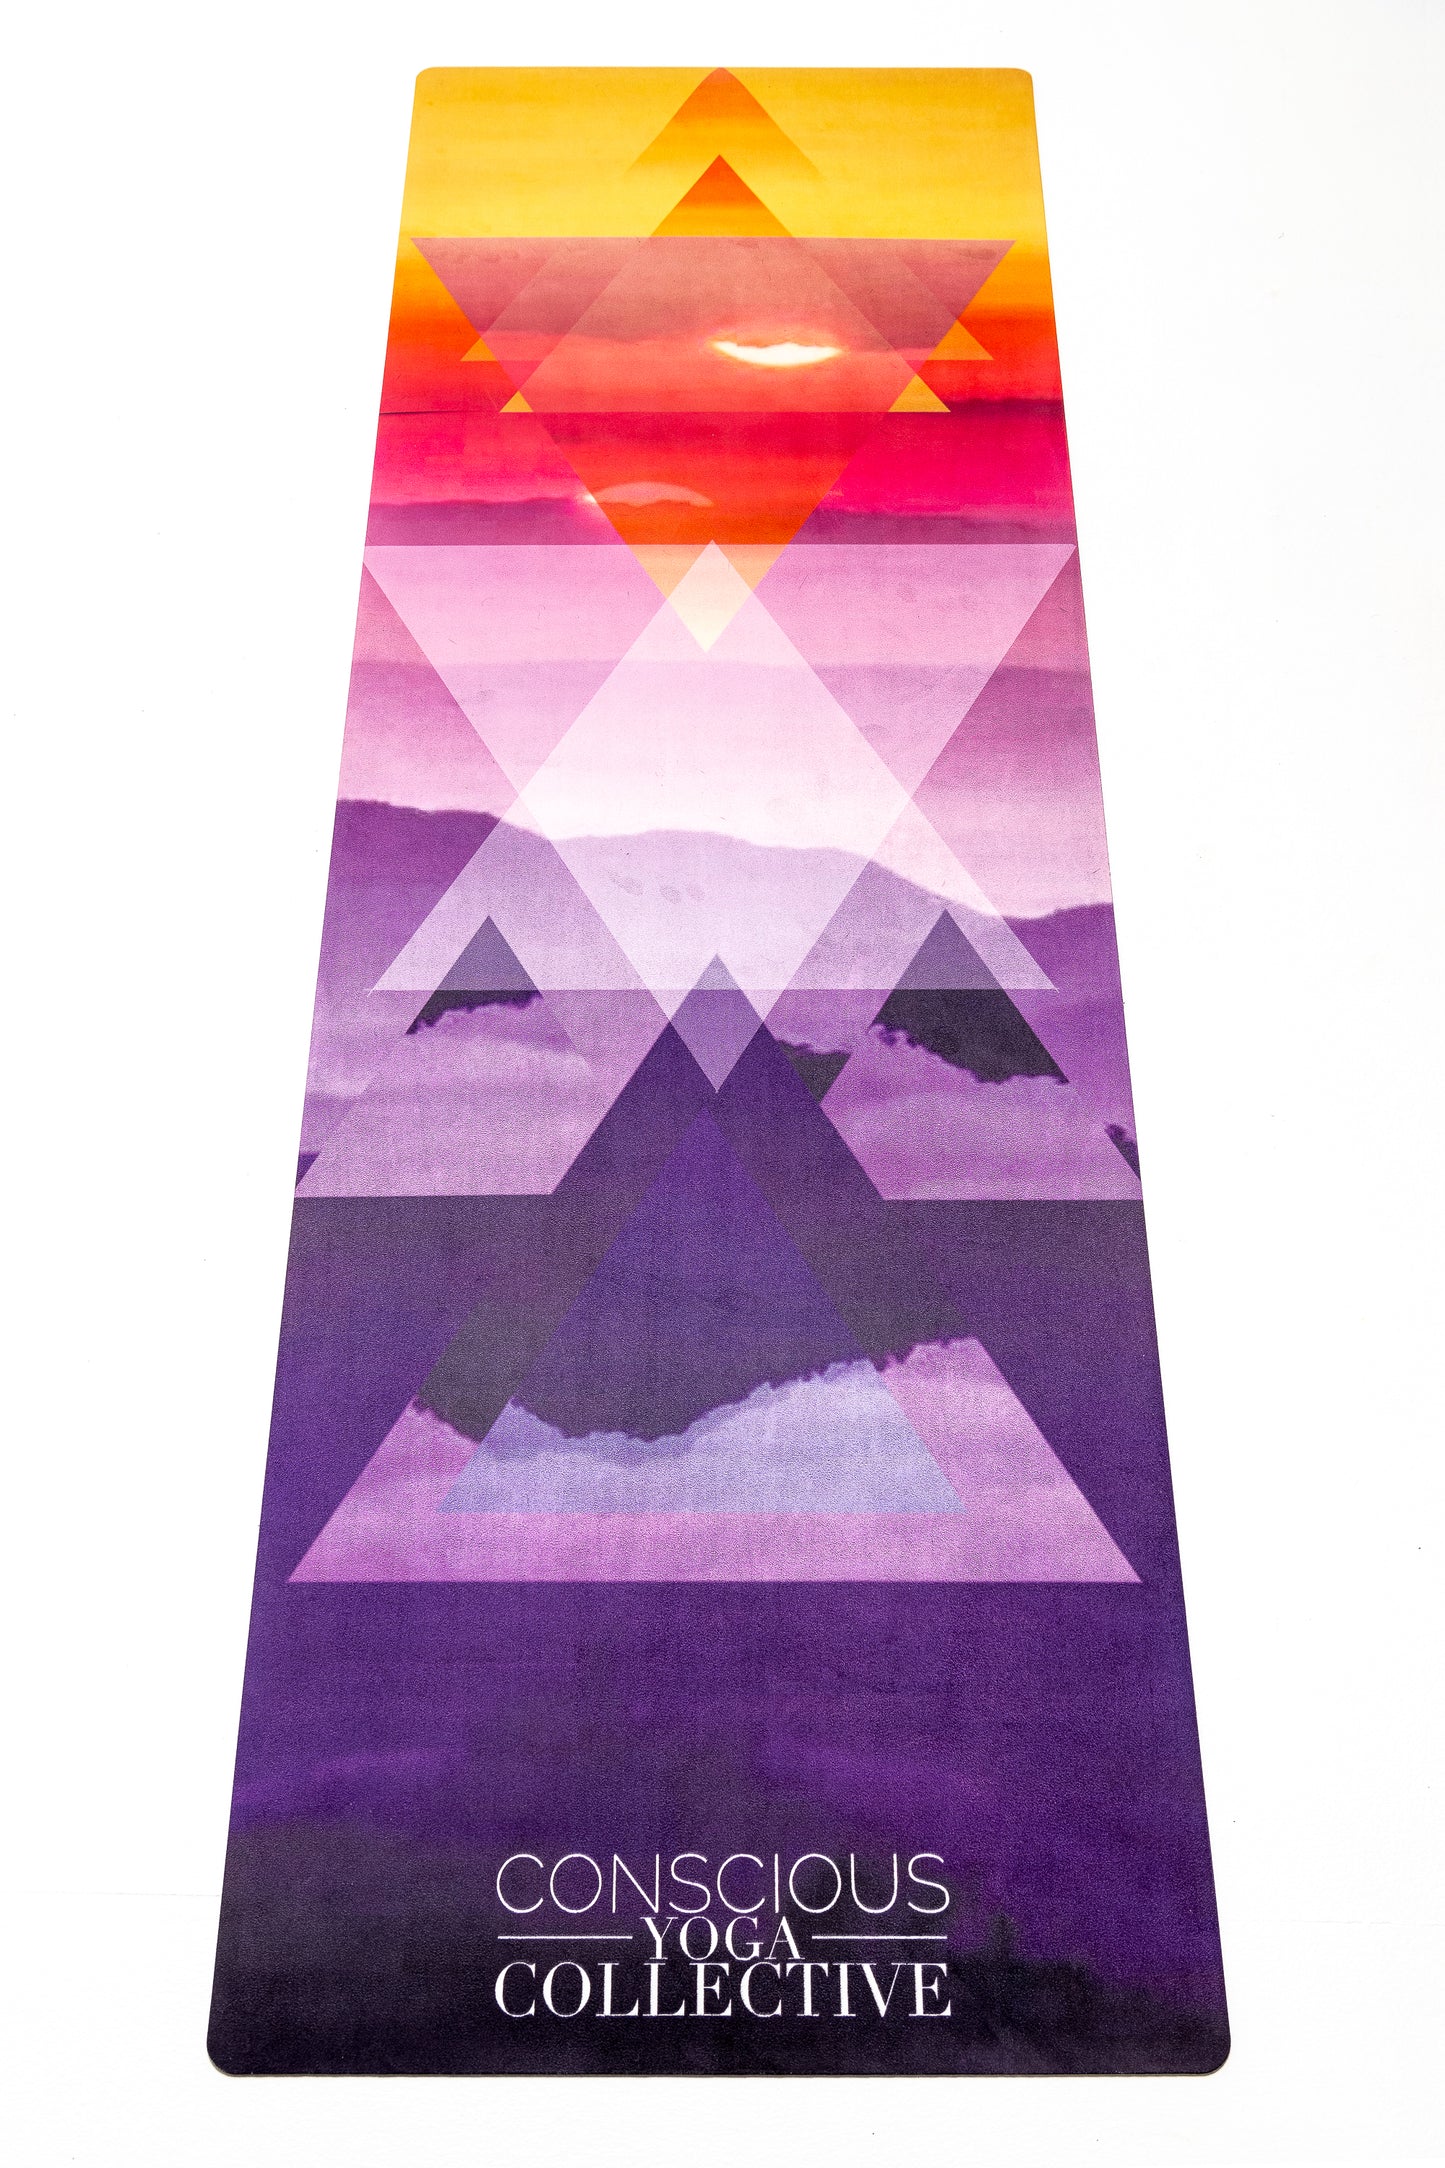 conscious yoga collective yoga mat with sunrise over mountains print with triangles overlaying i